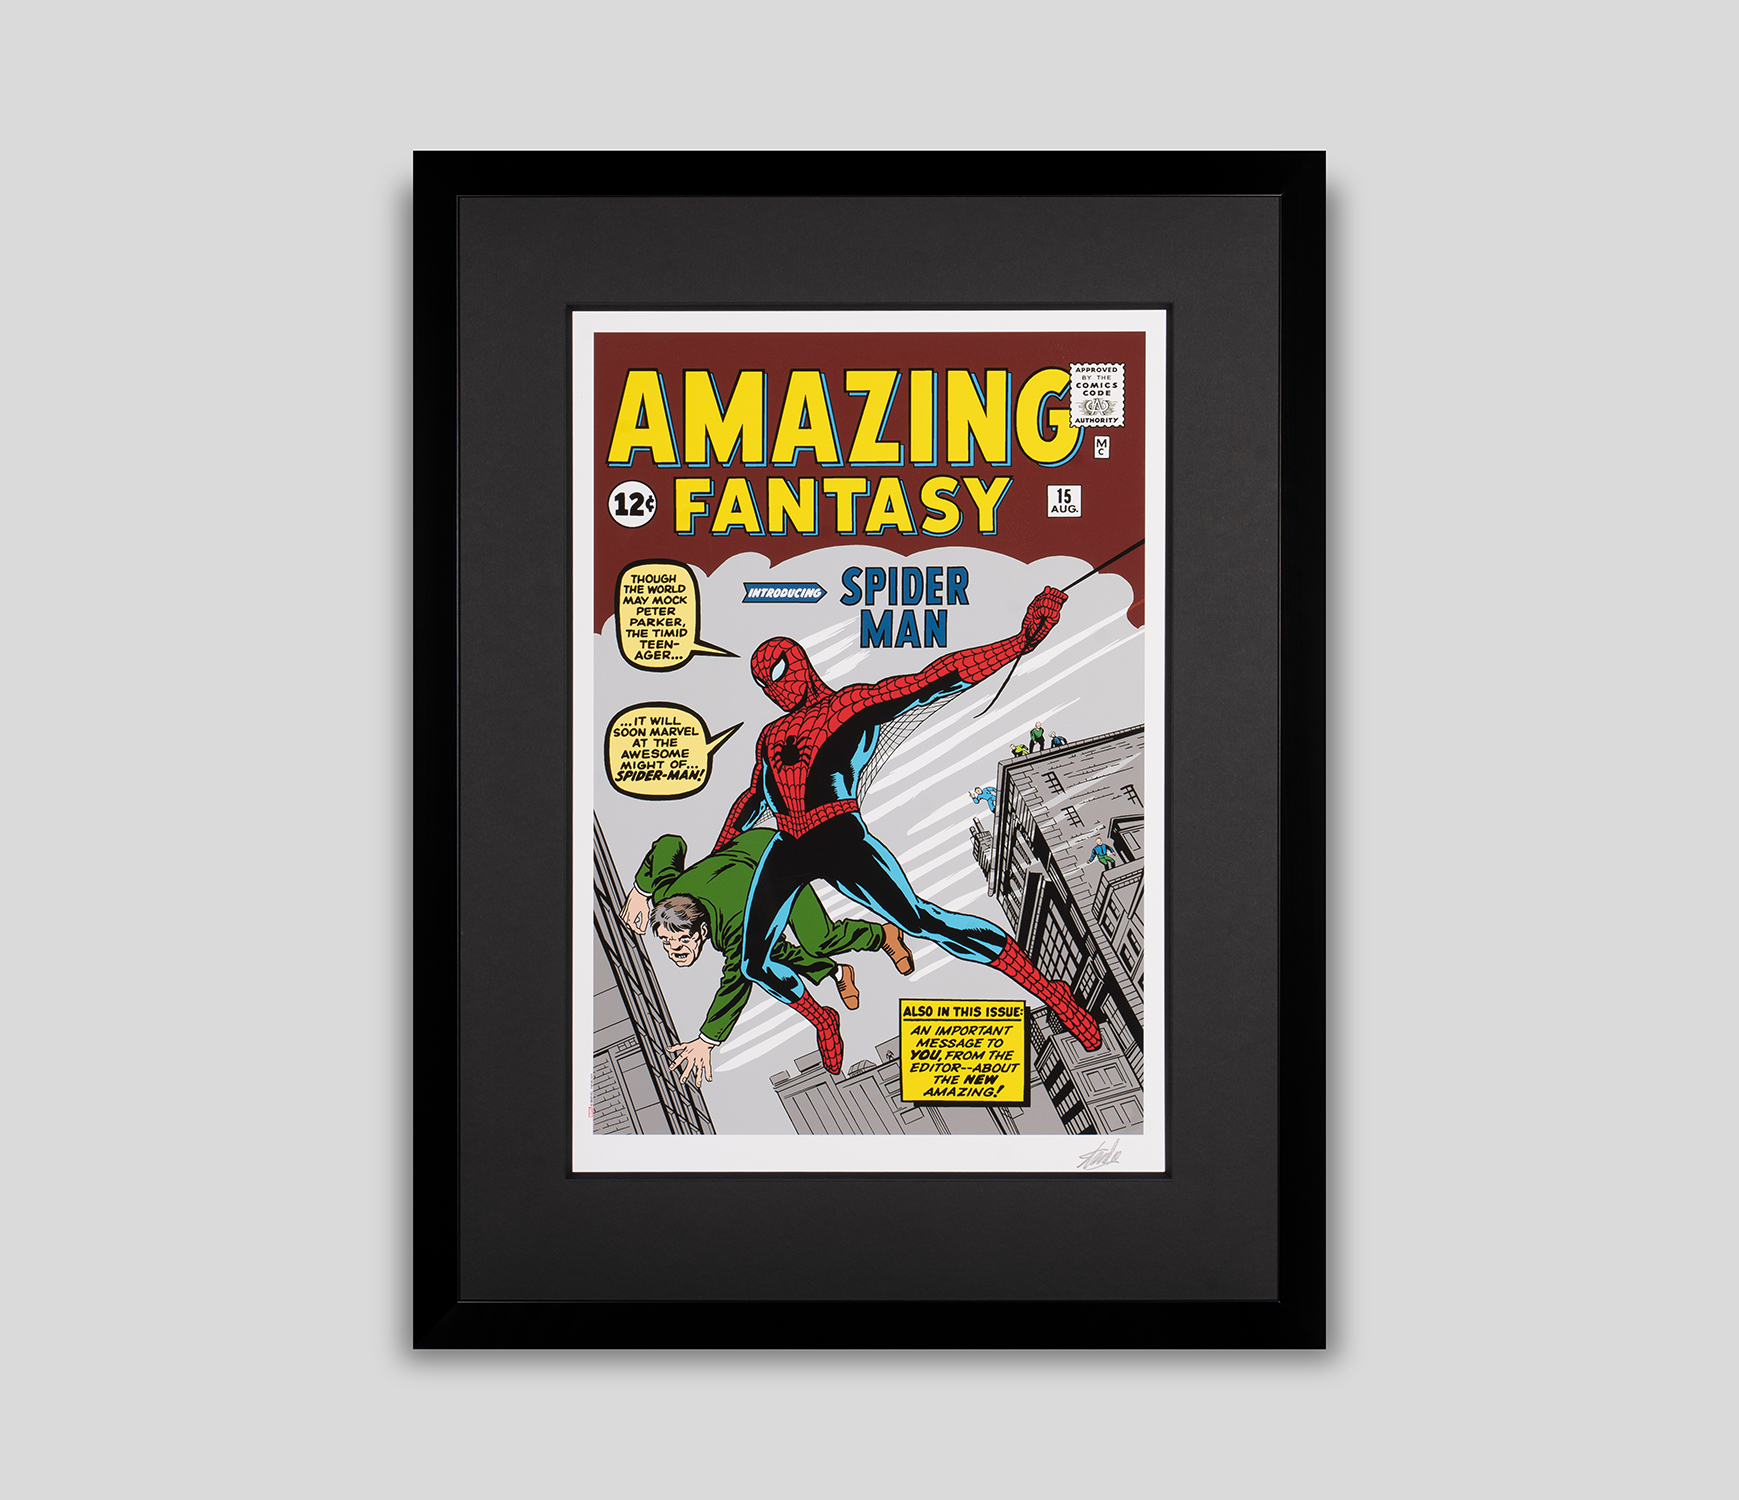 Amazing Fantasy #15 - Introducing Spider-Man (Giclée on paper)